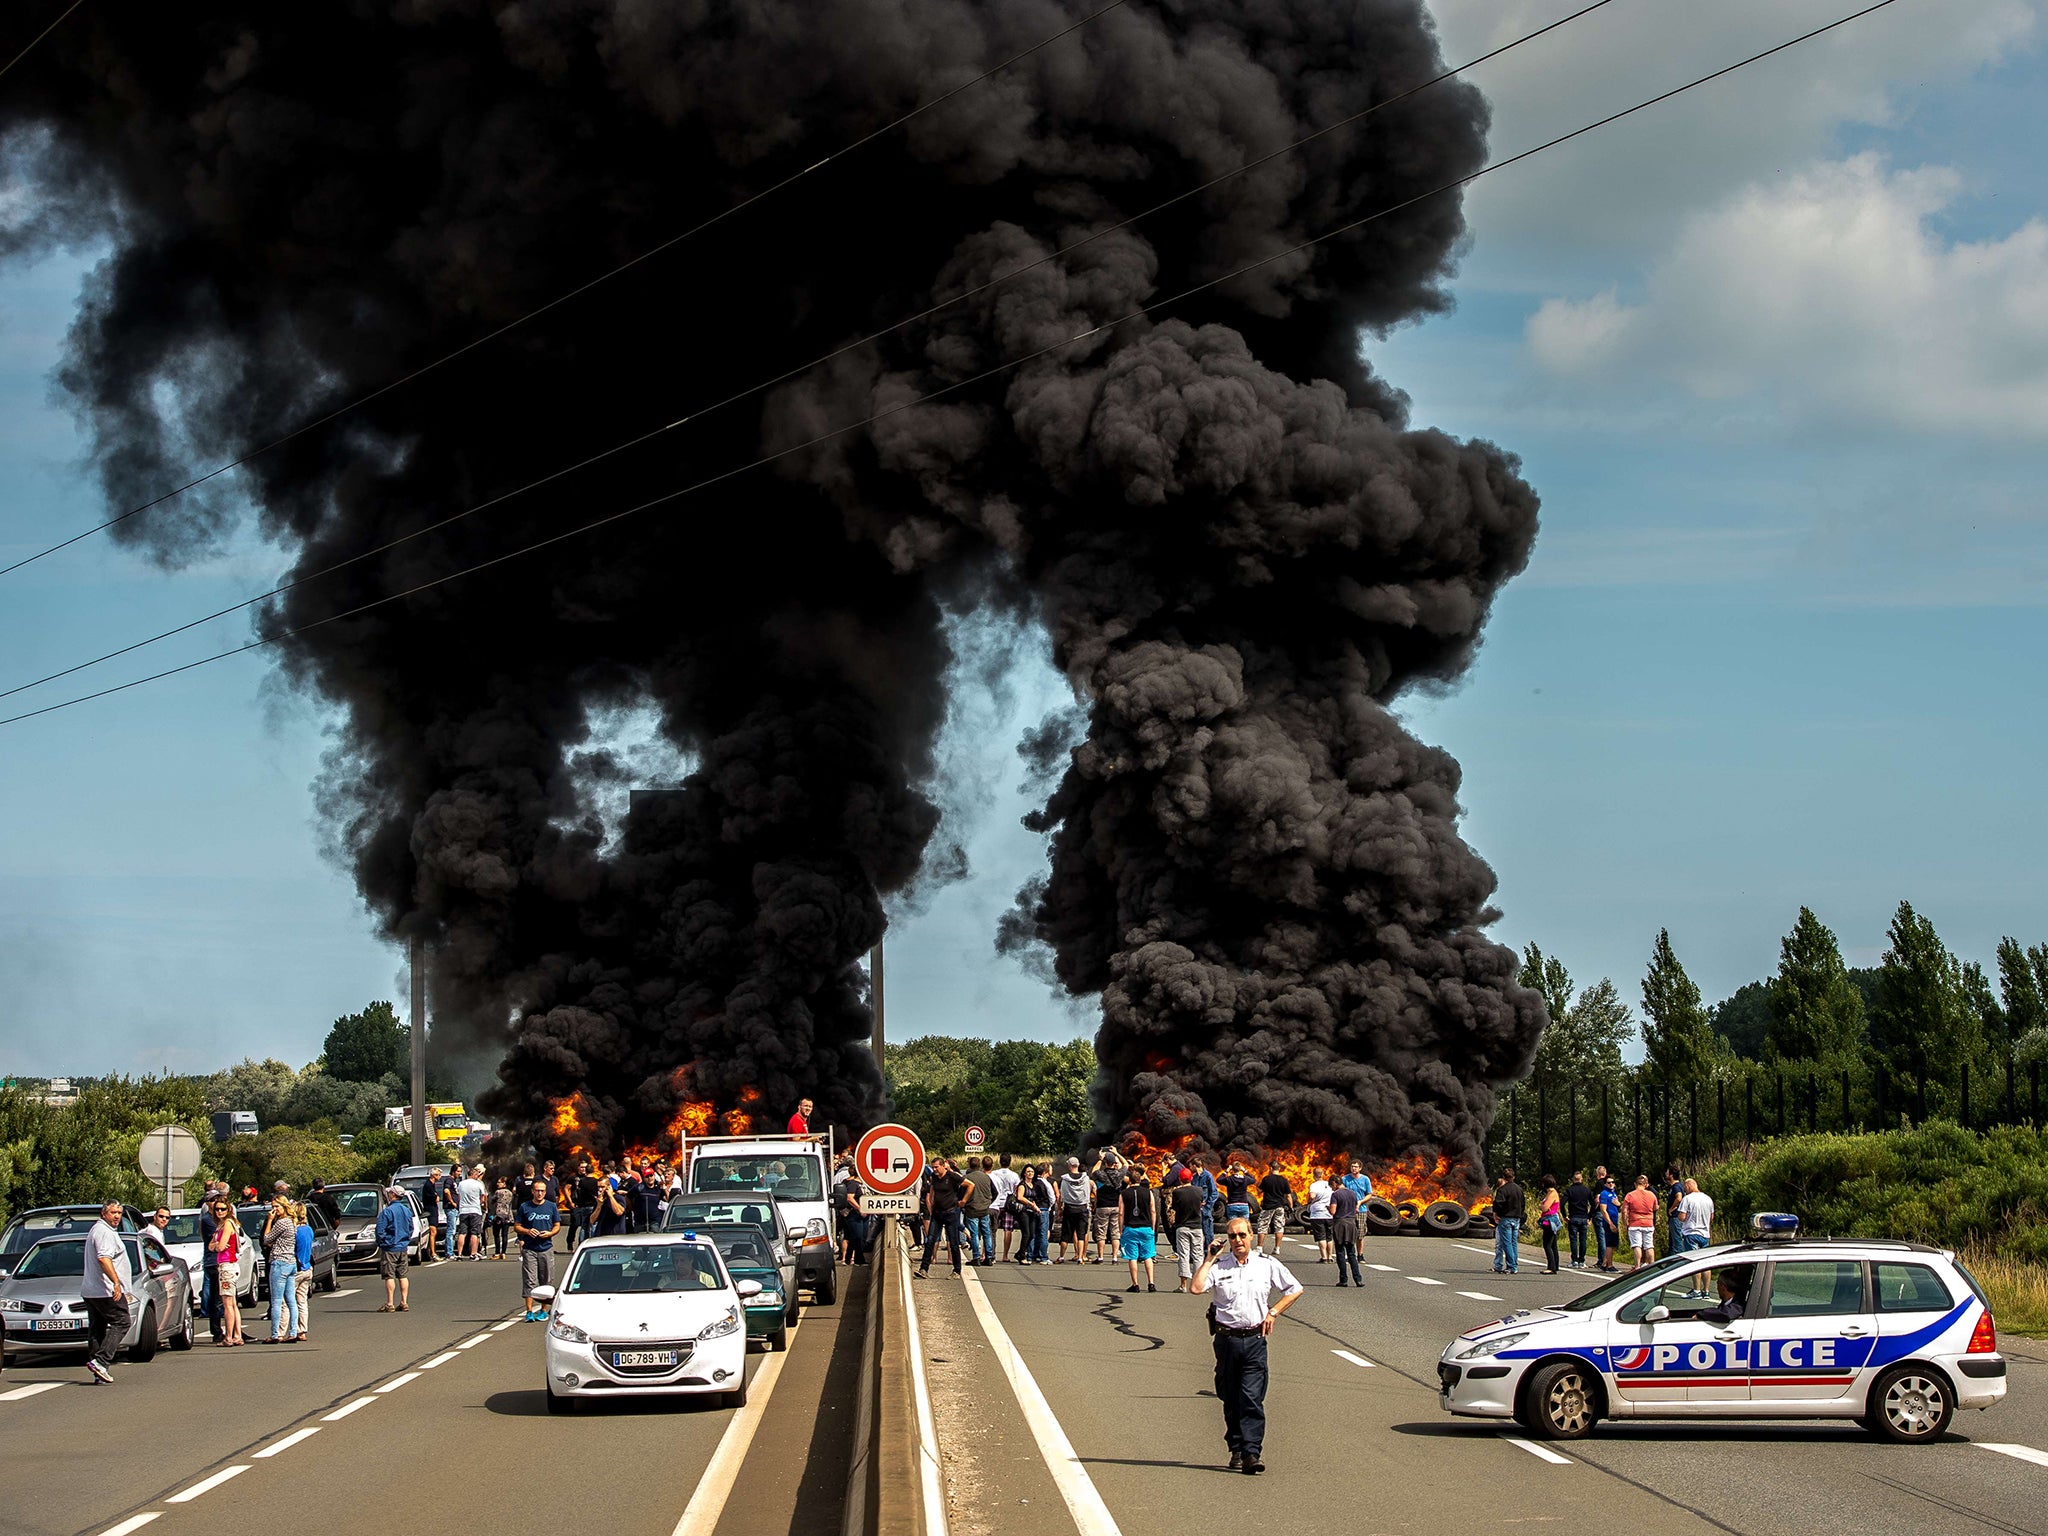 Striking employees of the My Ferry Link company block the access to the harbour after setting tyres on fire in Calais, following the failure of negotiations with French government concerning job cuts